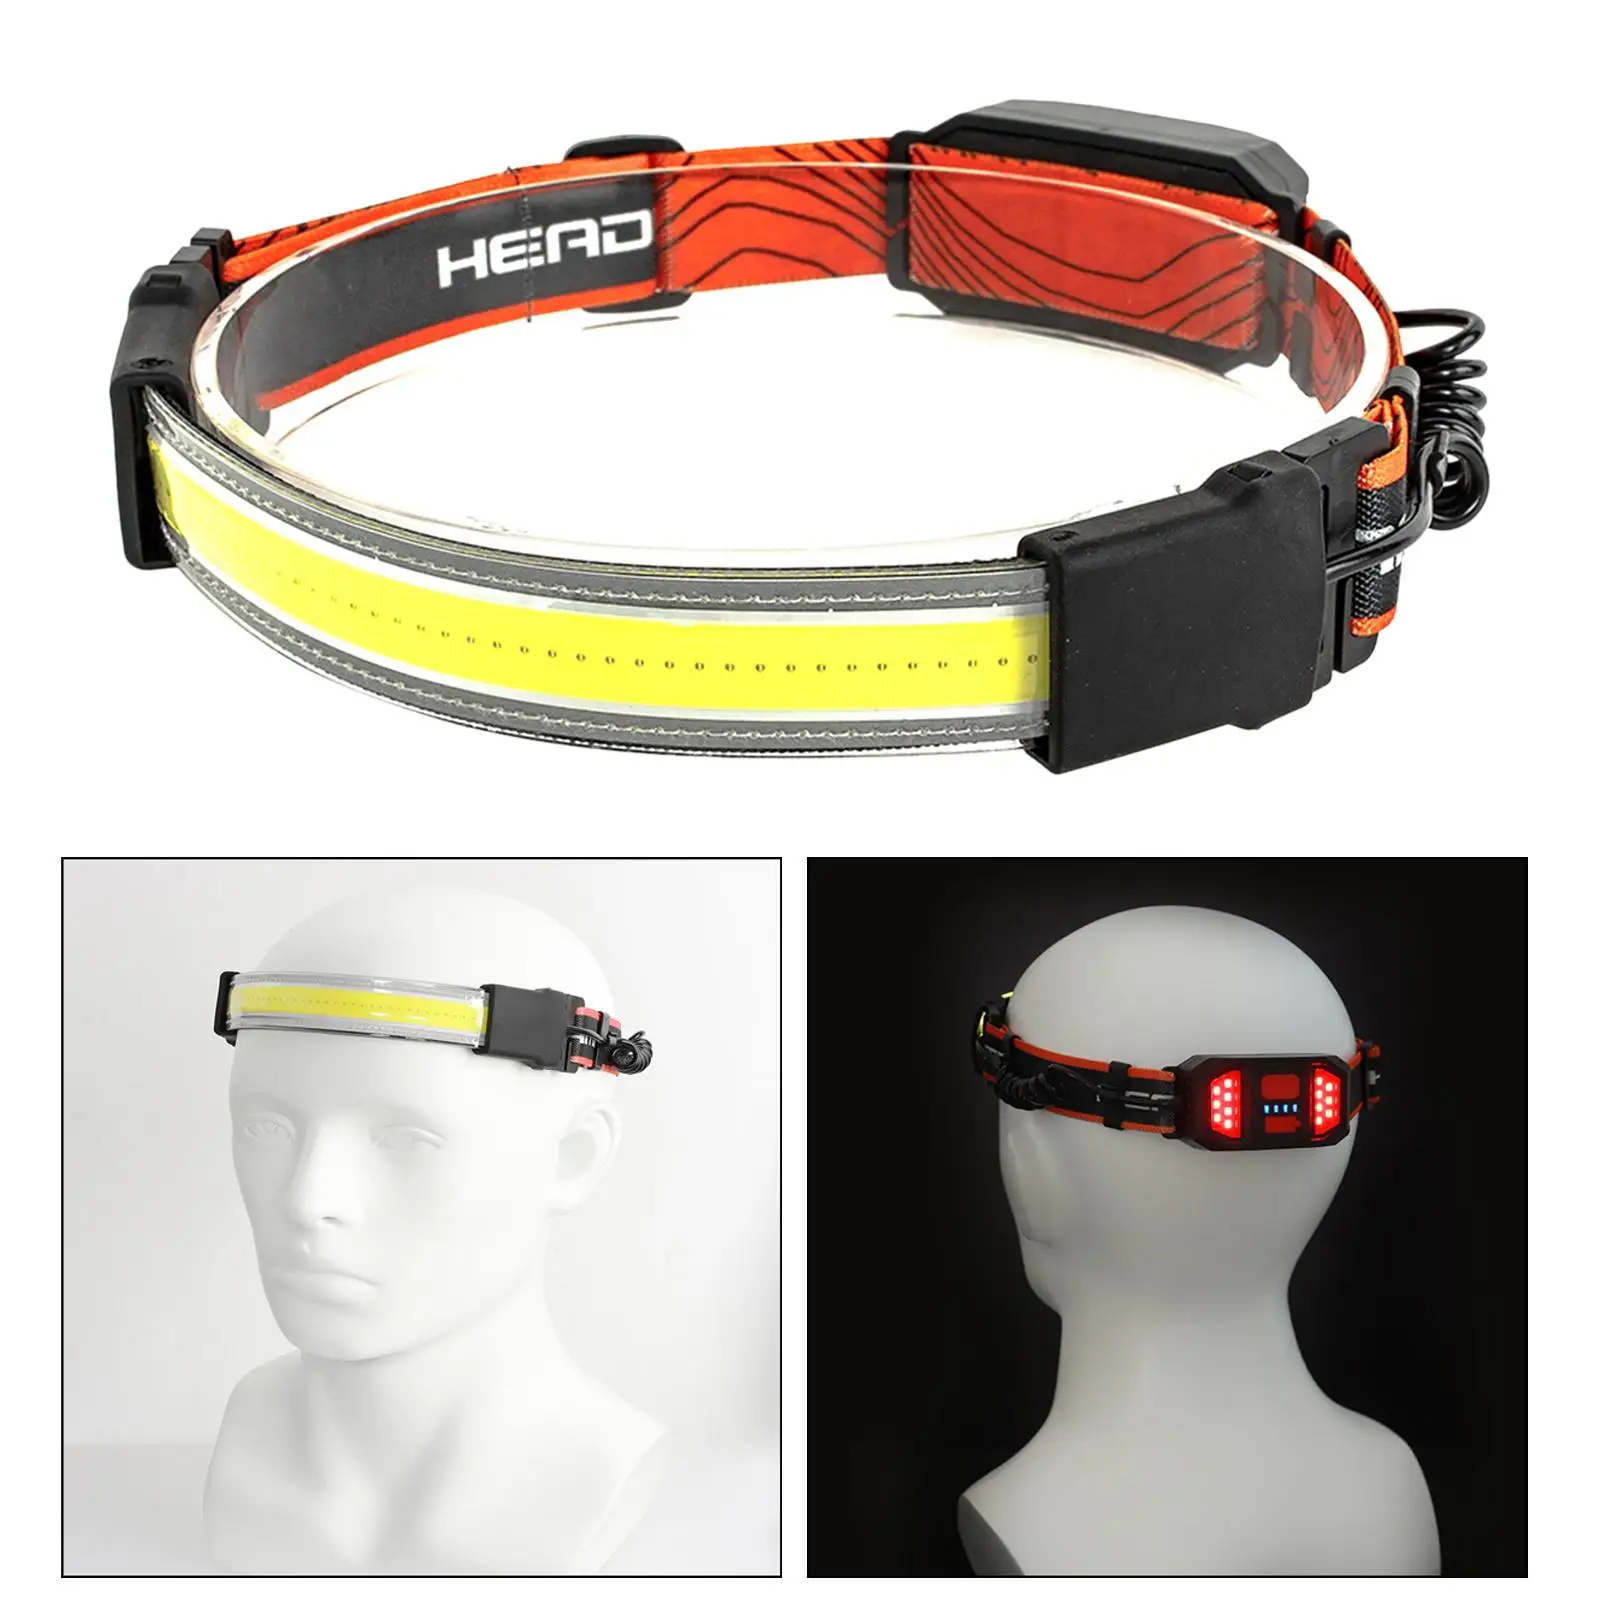  Rechargeable Waterproof LED . Great for Camping, Hunting, Runners, Hiking, Outdoors, Fishing